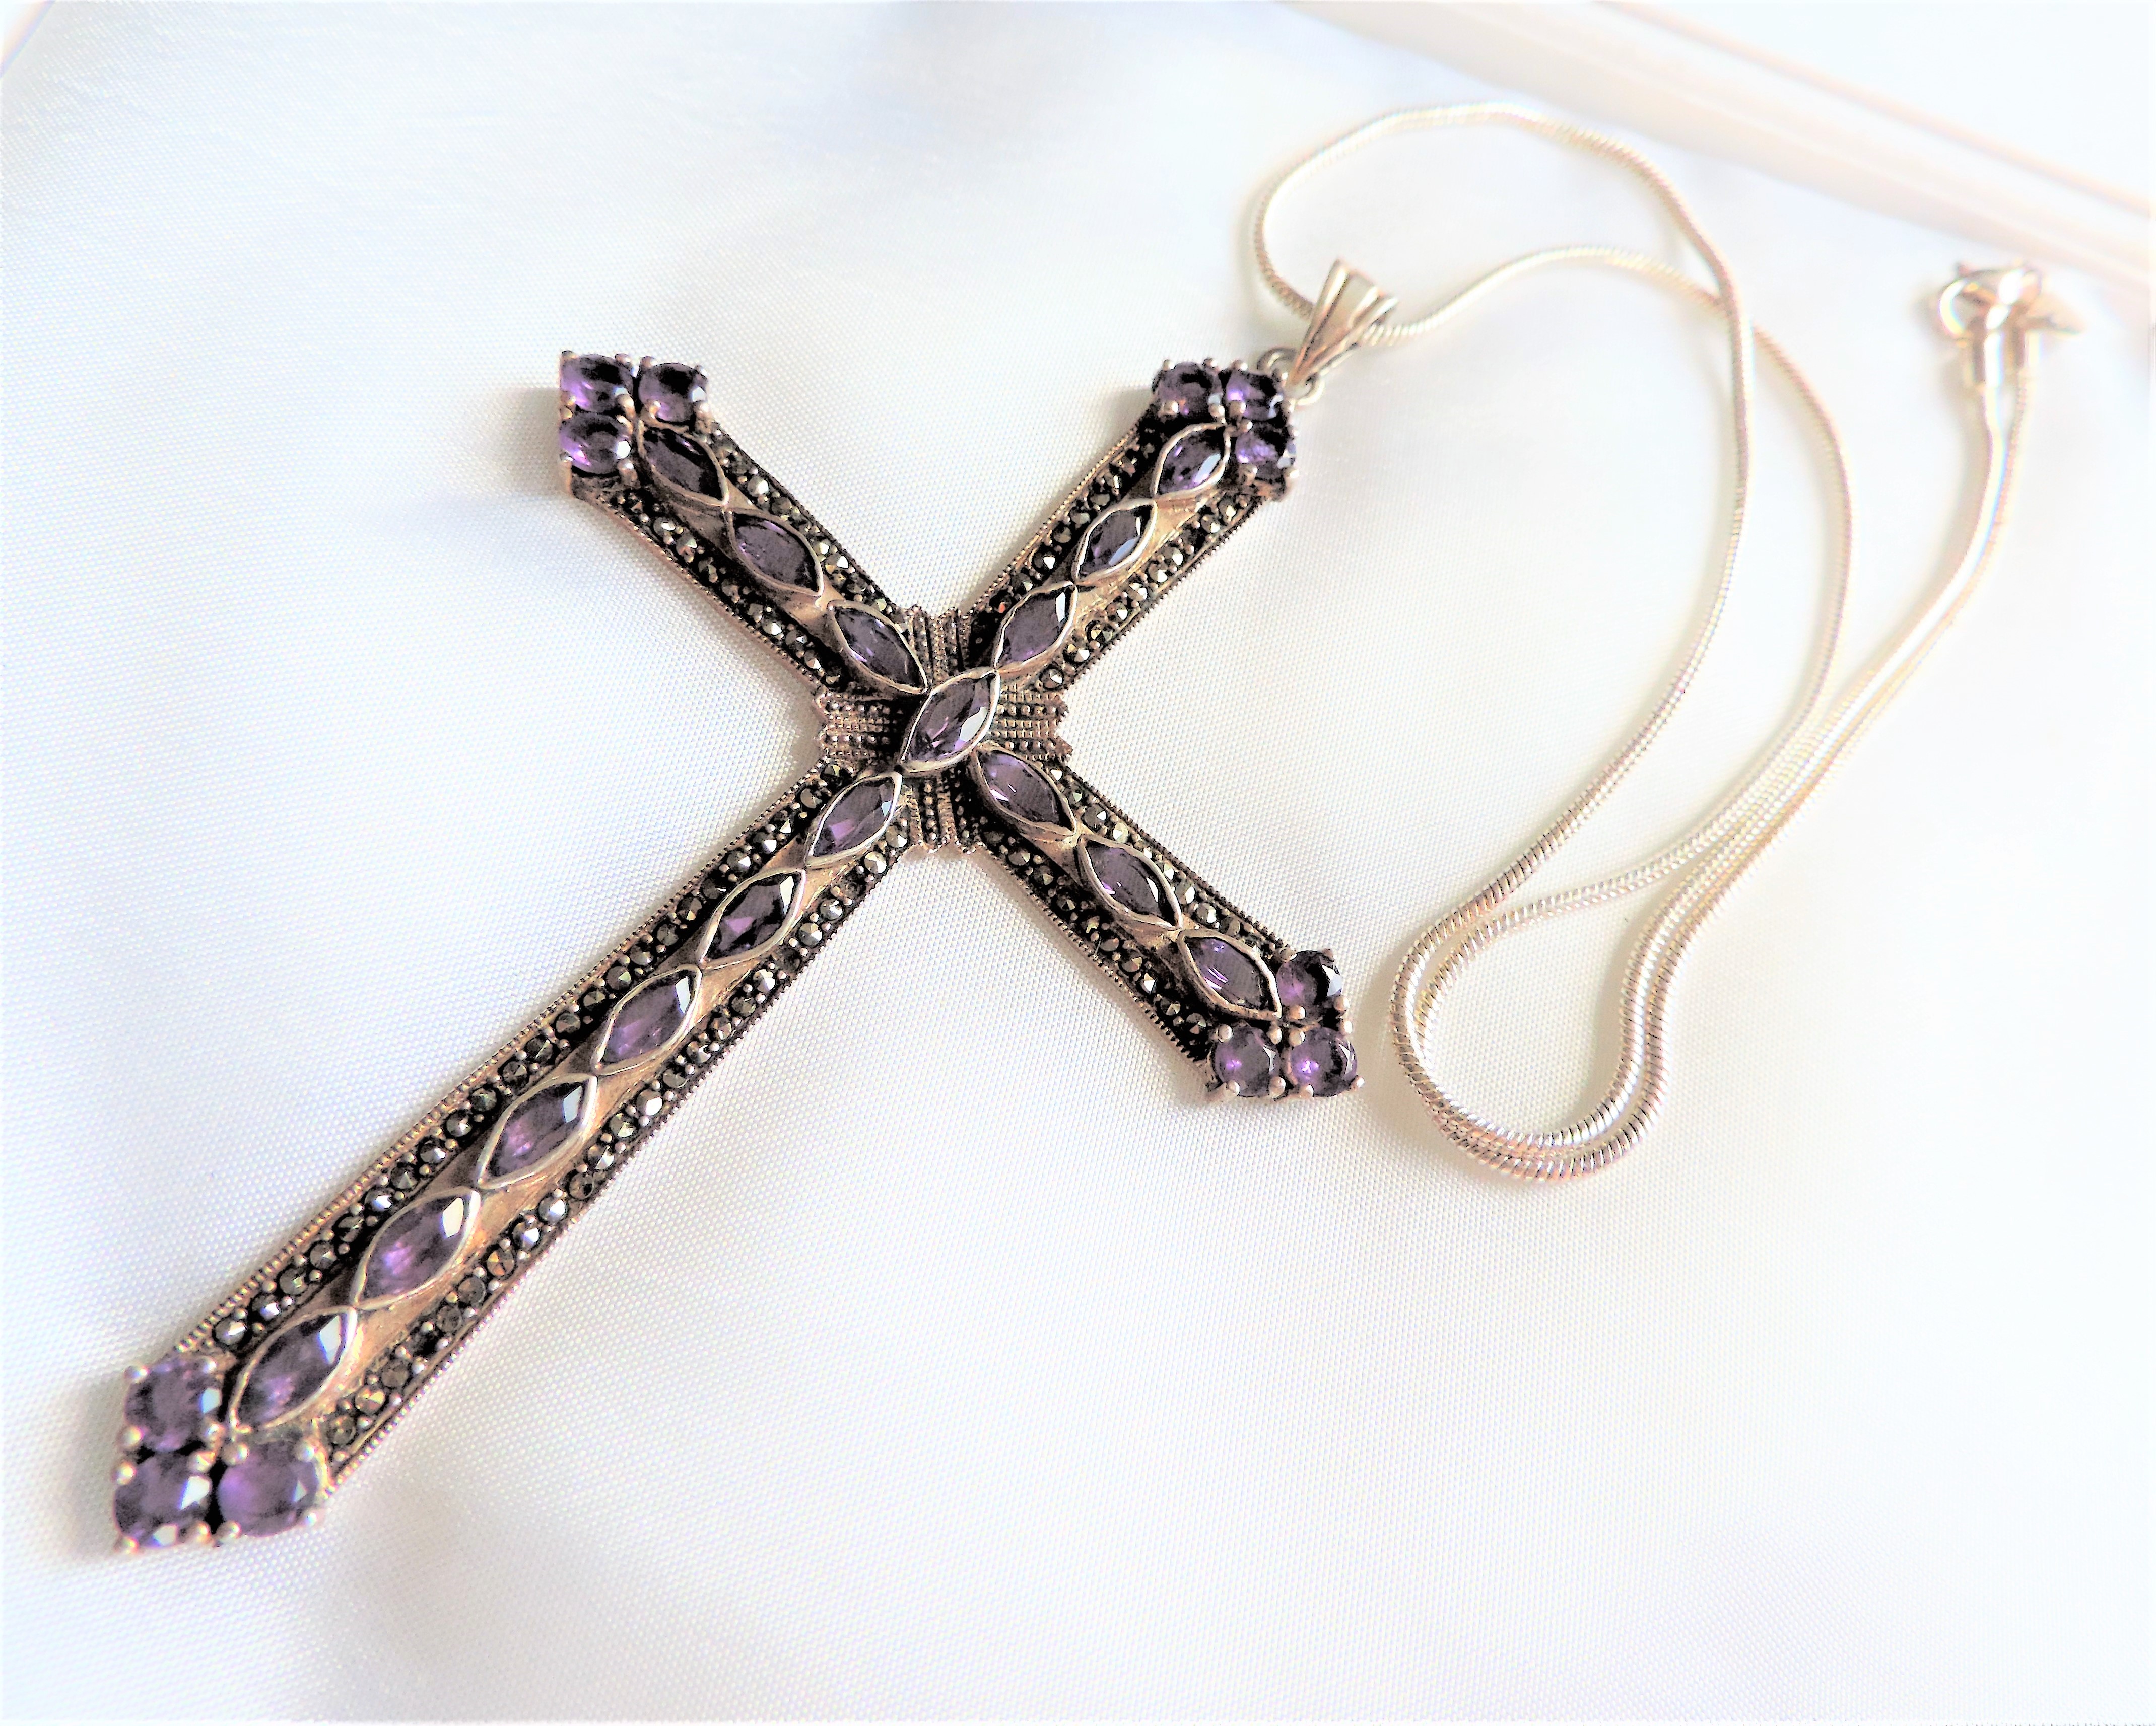 Large Ornate Sterling Silver 12CT Amethyst & Marcasite Cross & Chain - Image 2 of 4